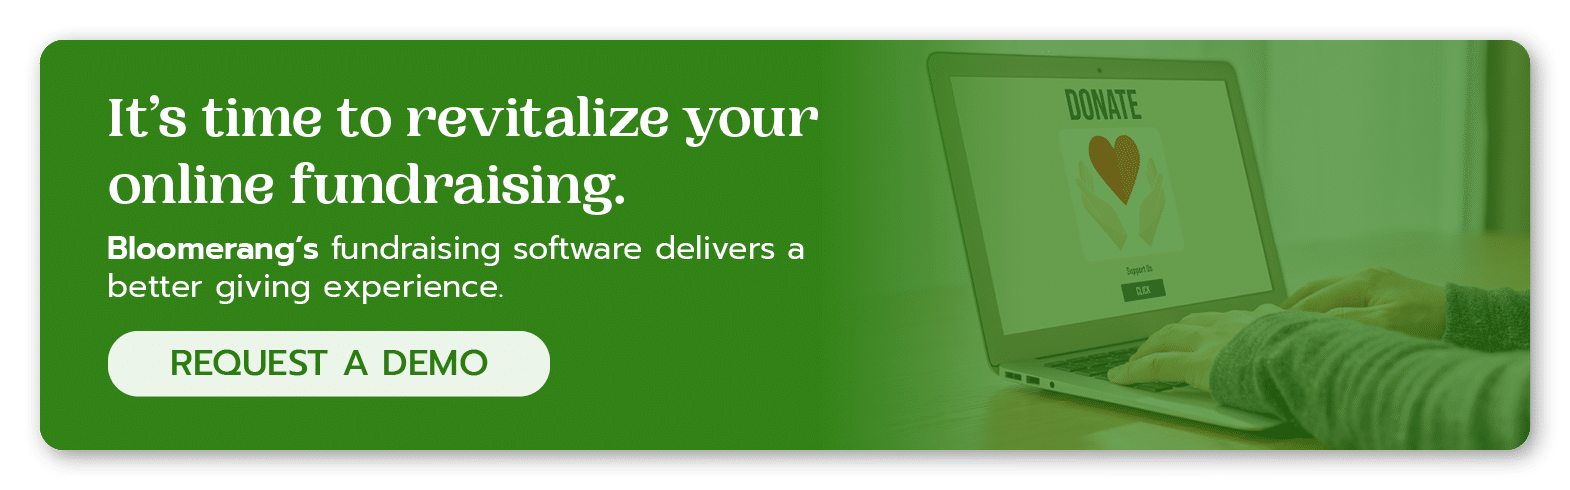 Bloomerang’s fundraising software delivers a better giving experience. Request a demo. 